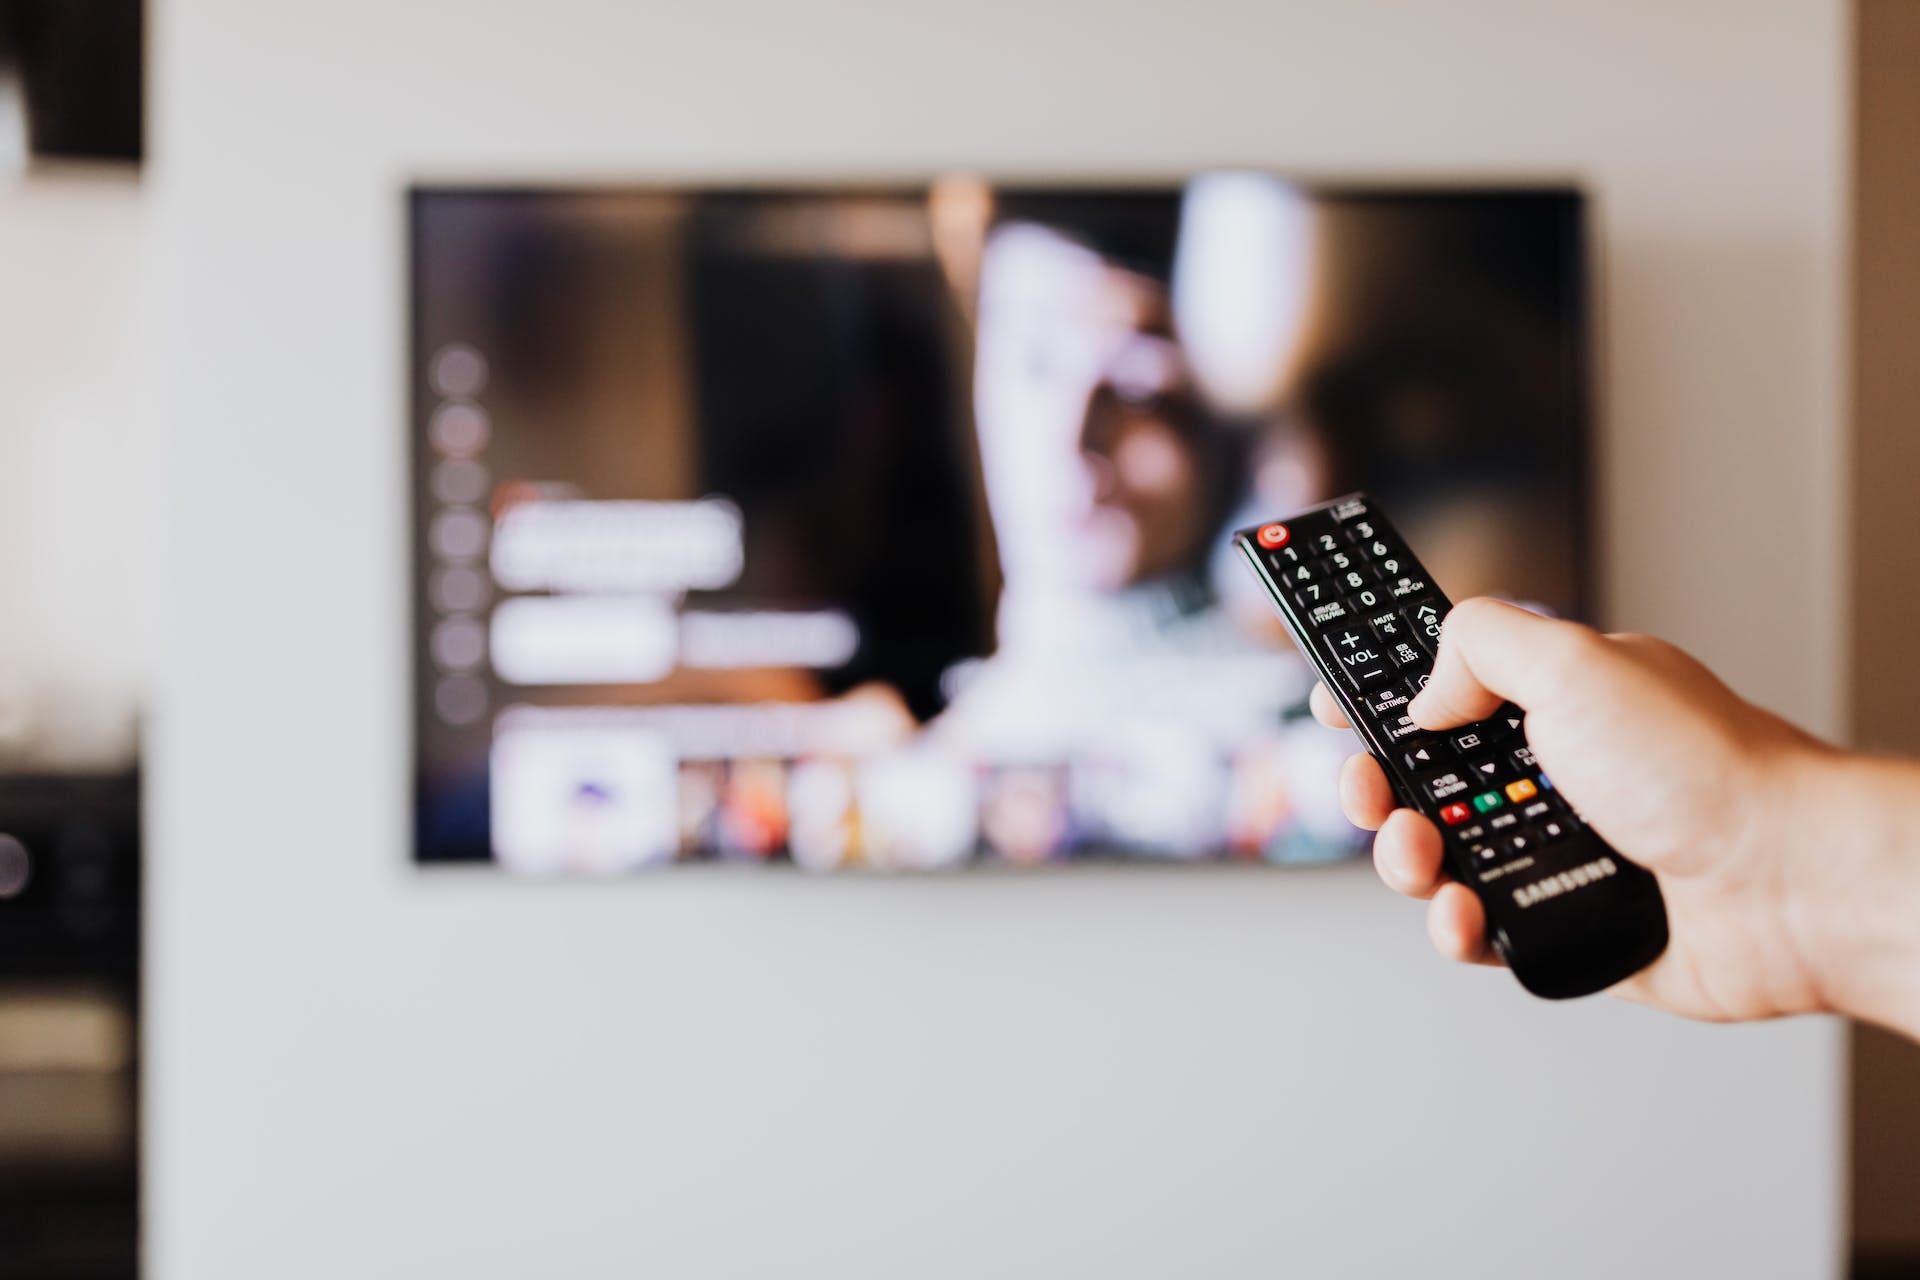 A person pressing the button of a TV remote control | Source: Pexels